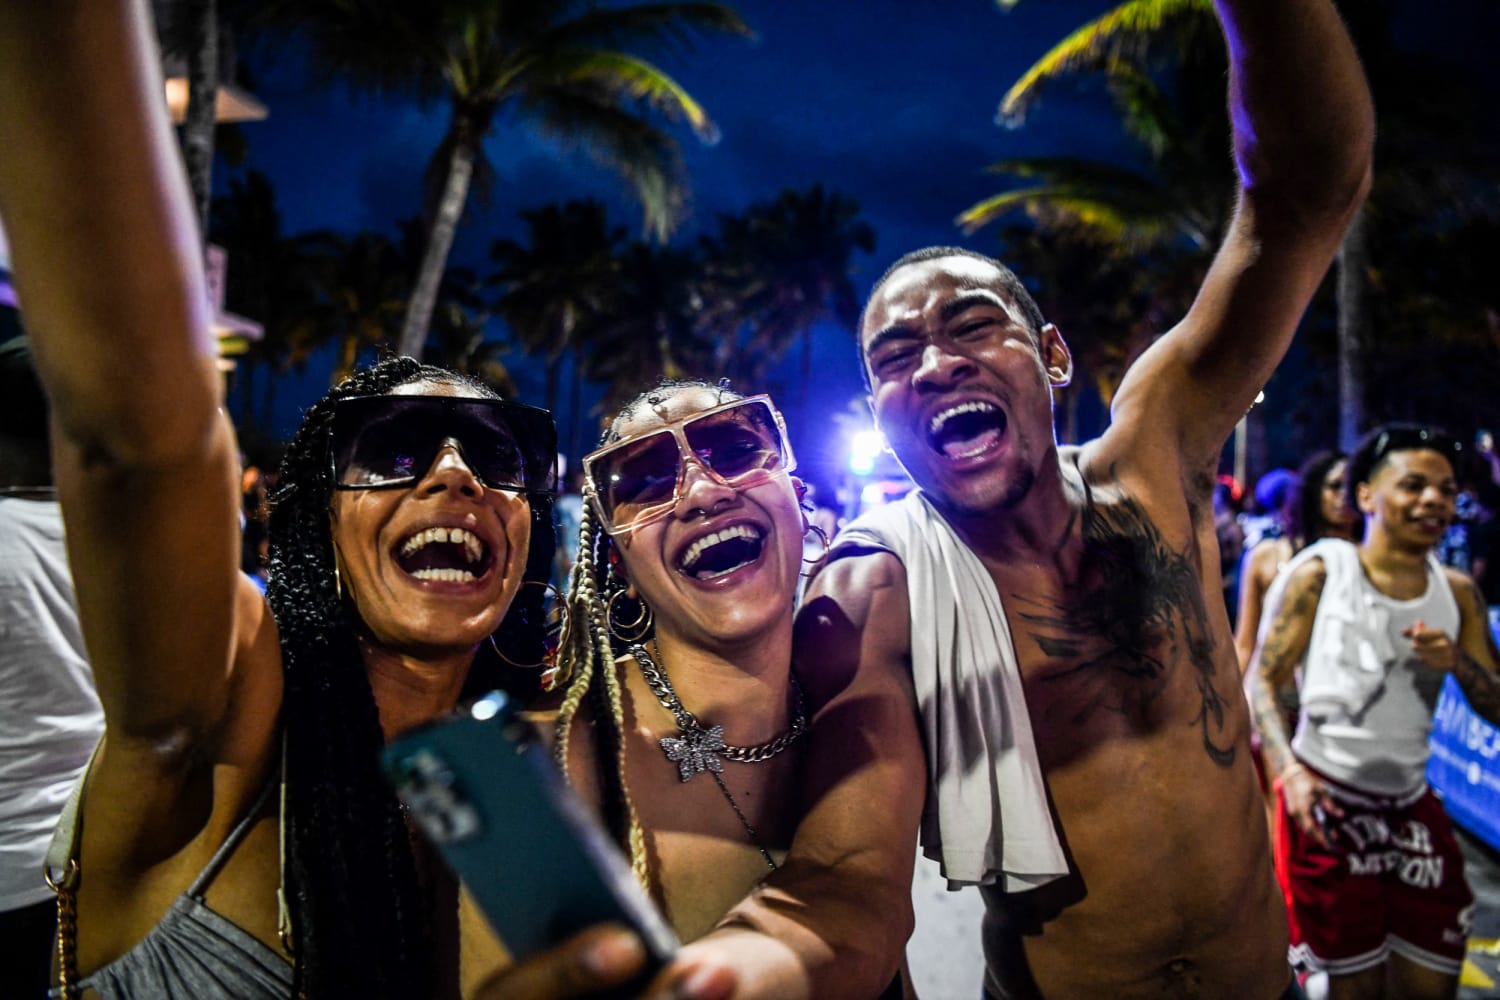 Miami Beachs curfew on spring break partiers wrongly blames outsiders for the chaos pic